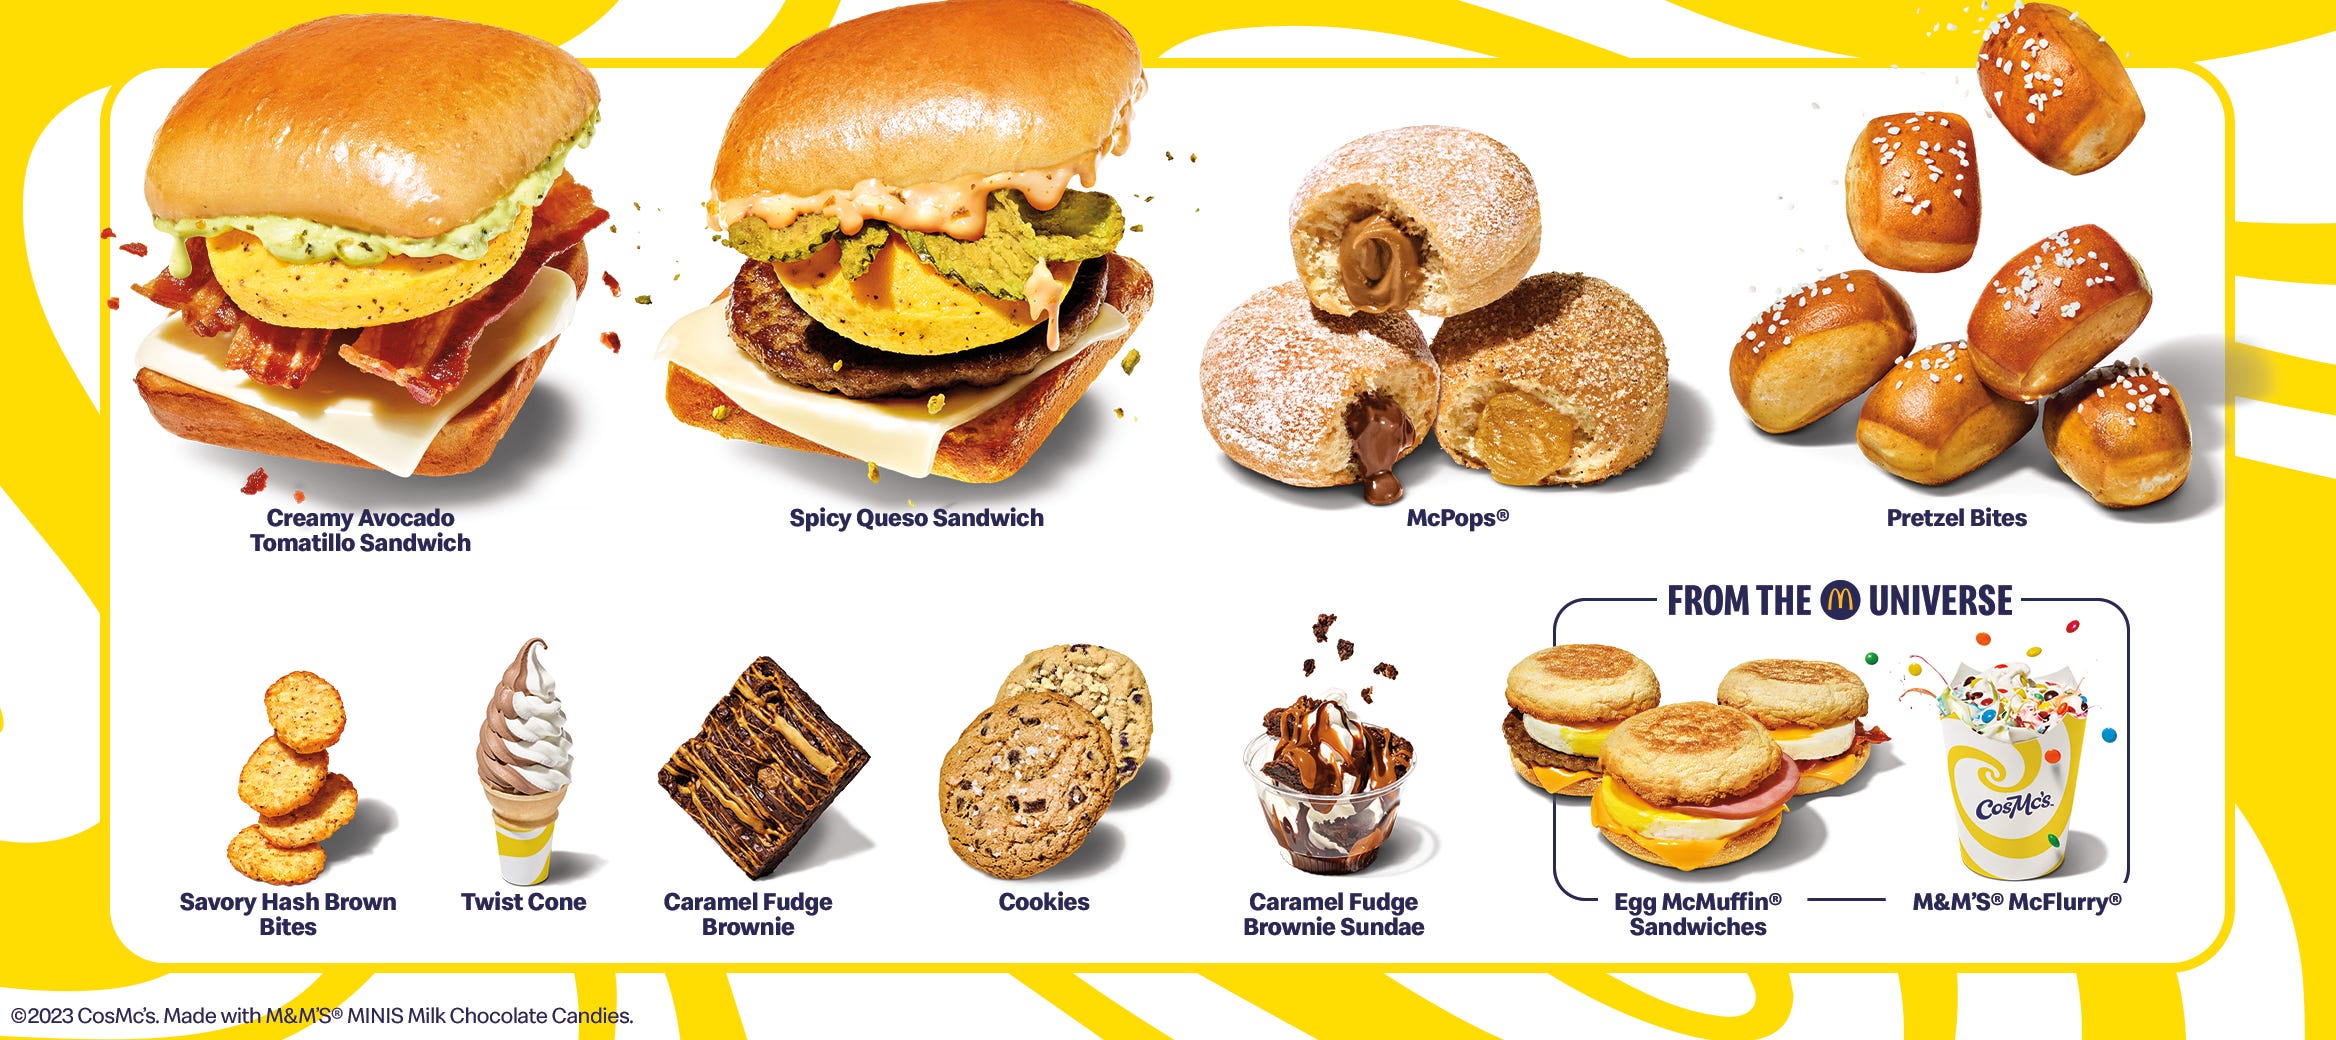 mcdonald's unveiled the menu for cosmc's, a beverage-focused concept that could compete with starbucks